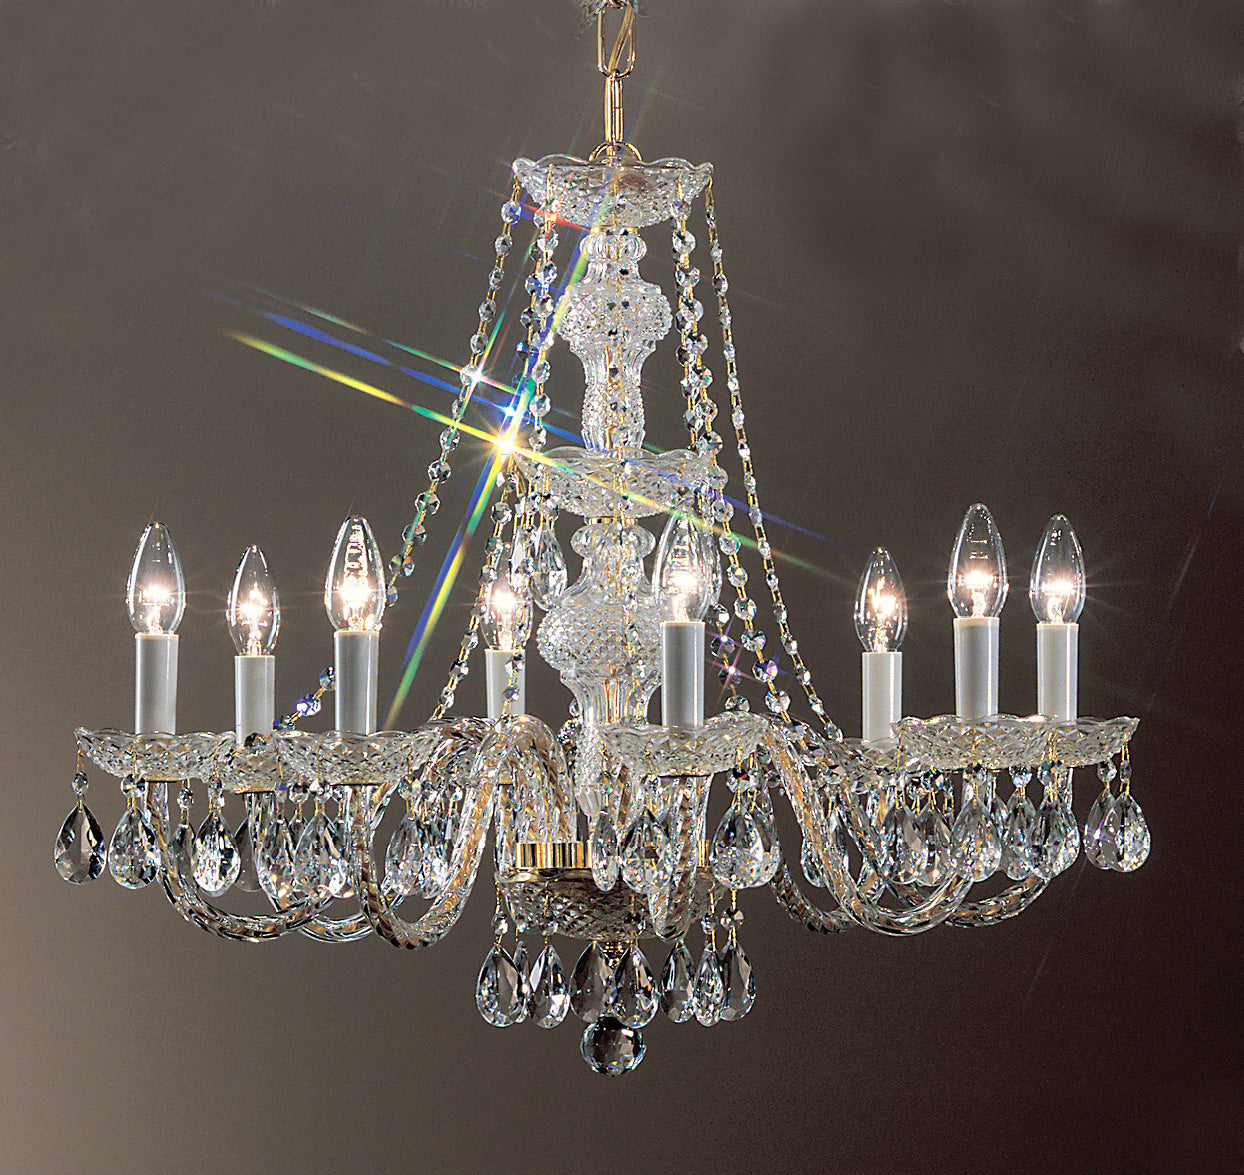 Classic Lighting 8208 GP I Monticello Crystal/Glass Chandelier in Gold